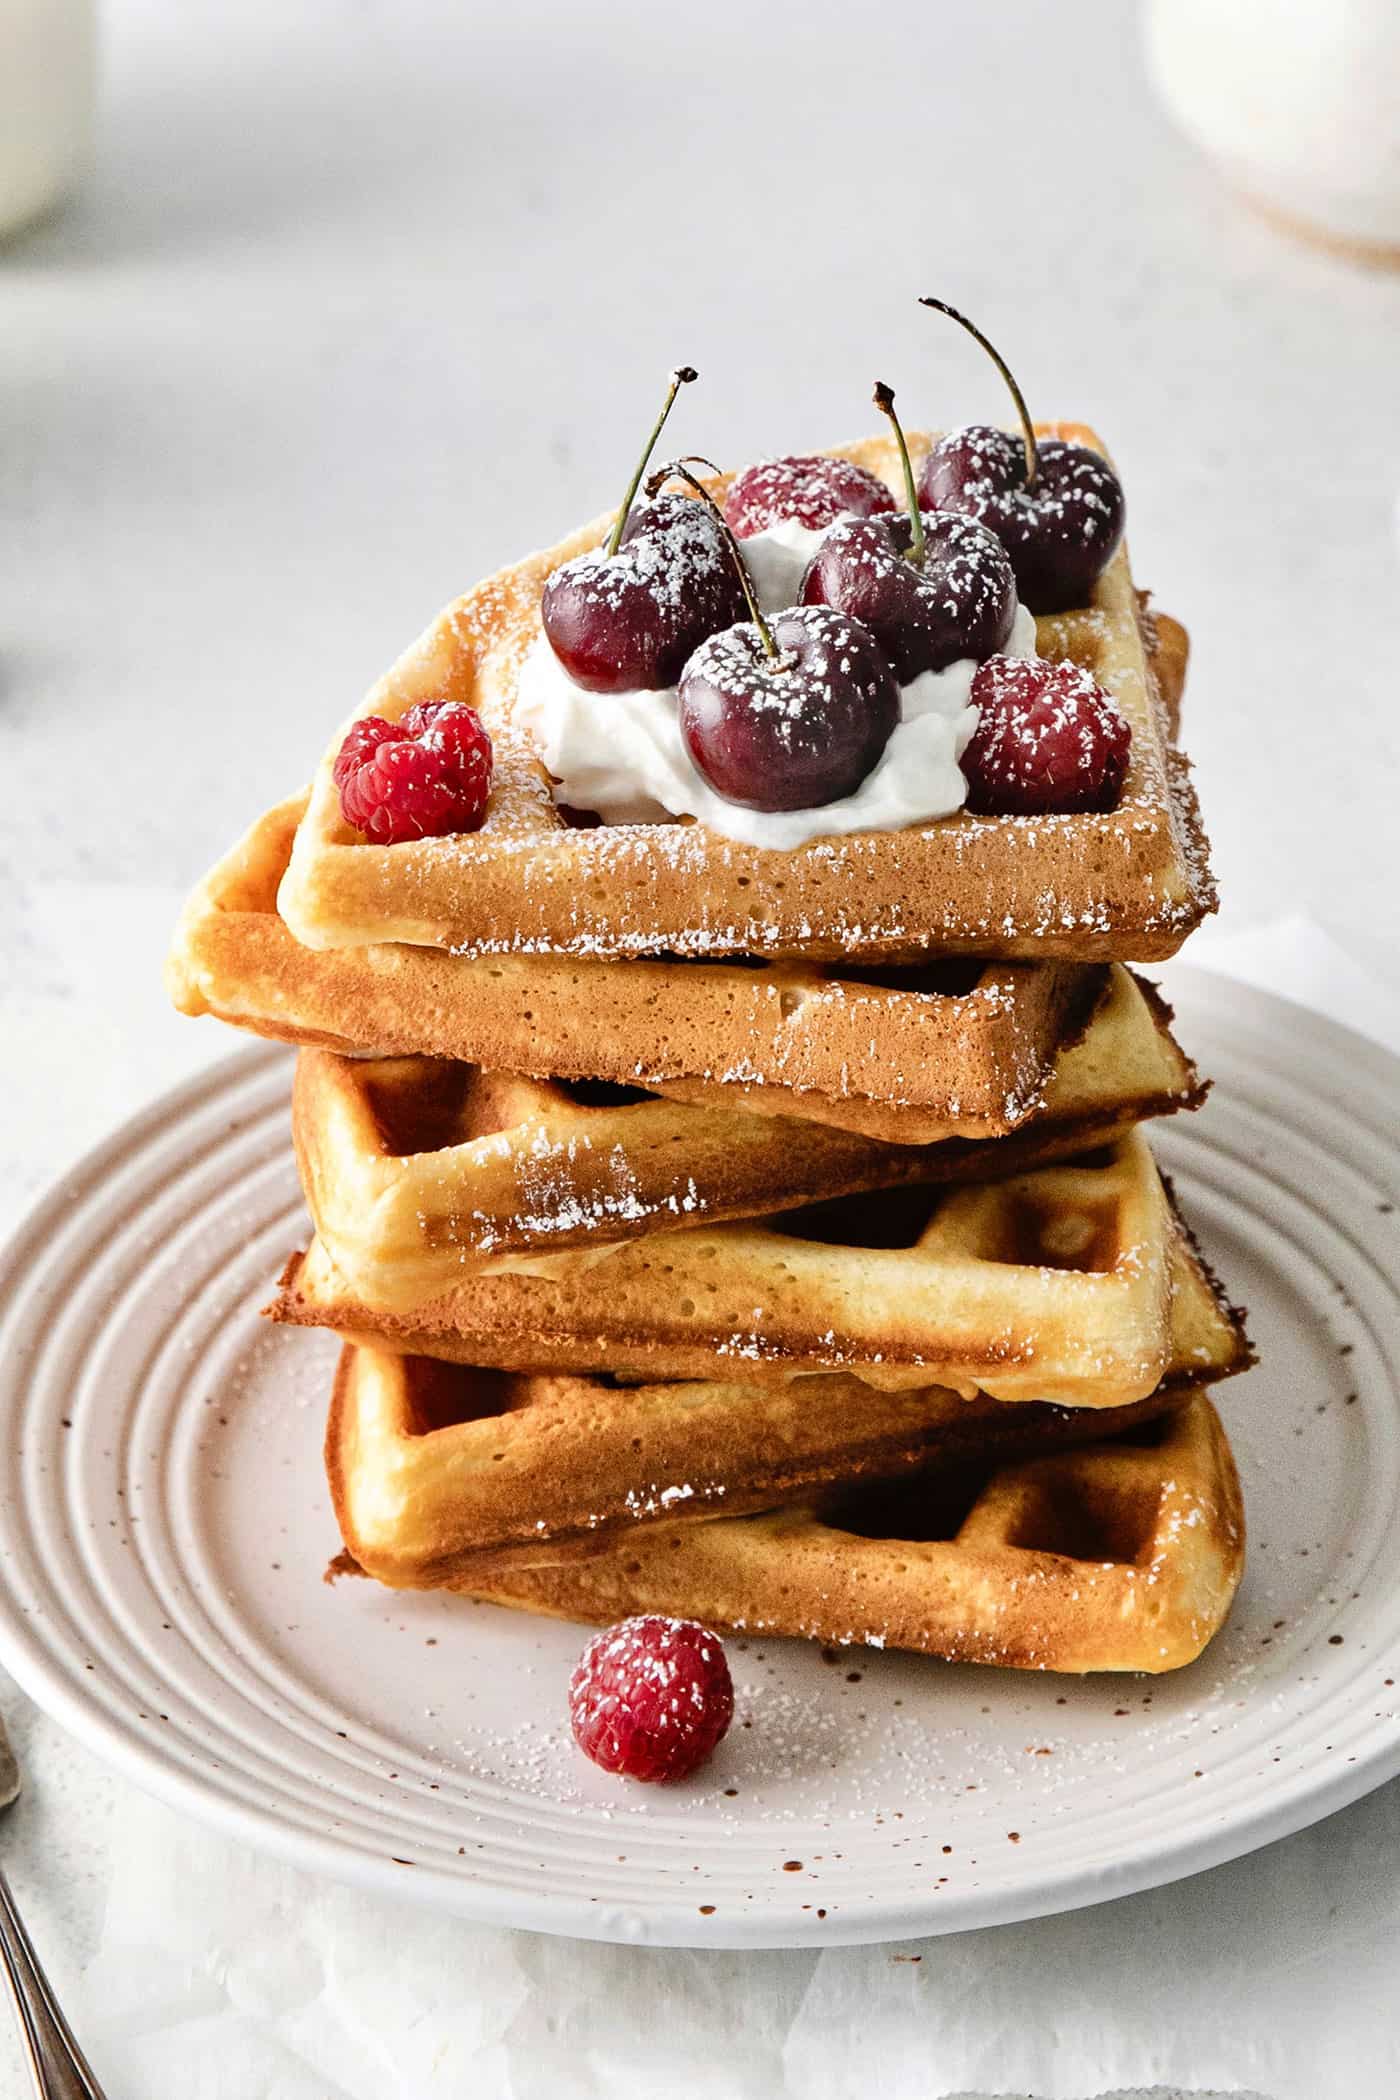 Angled view of a stack of waffles topped with cherries